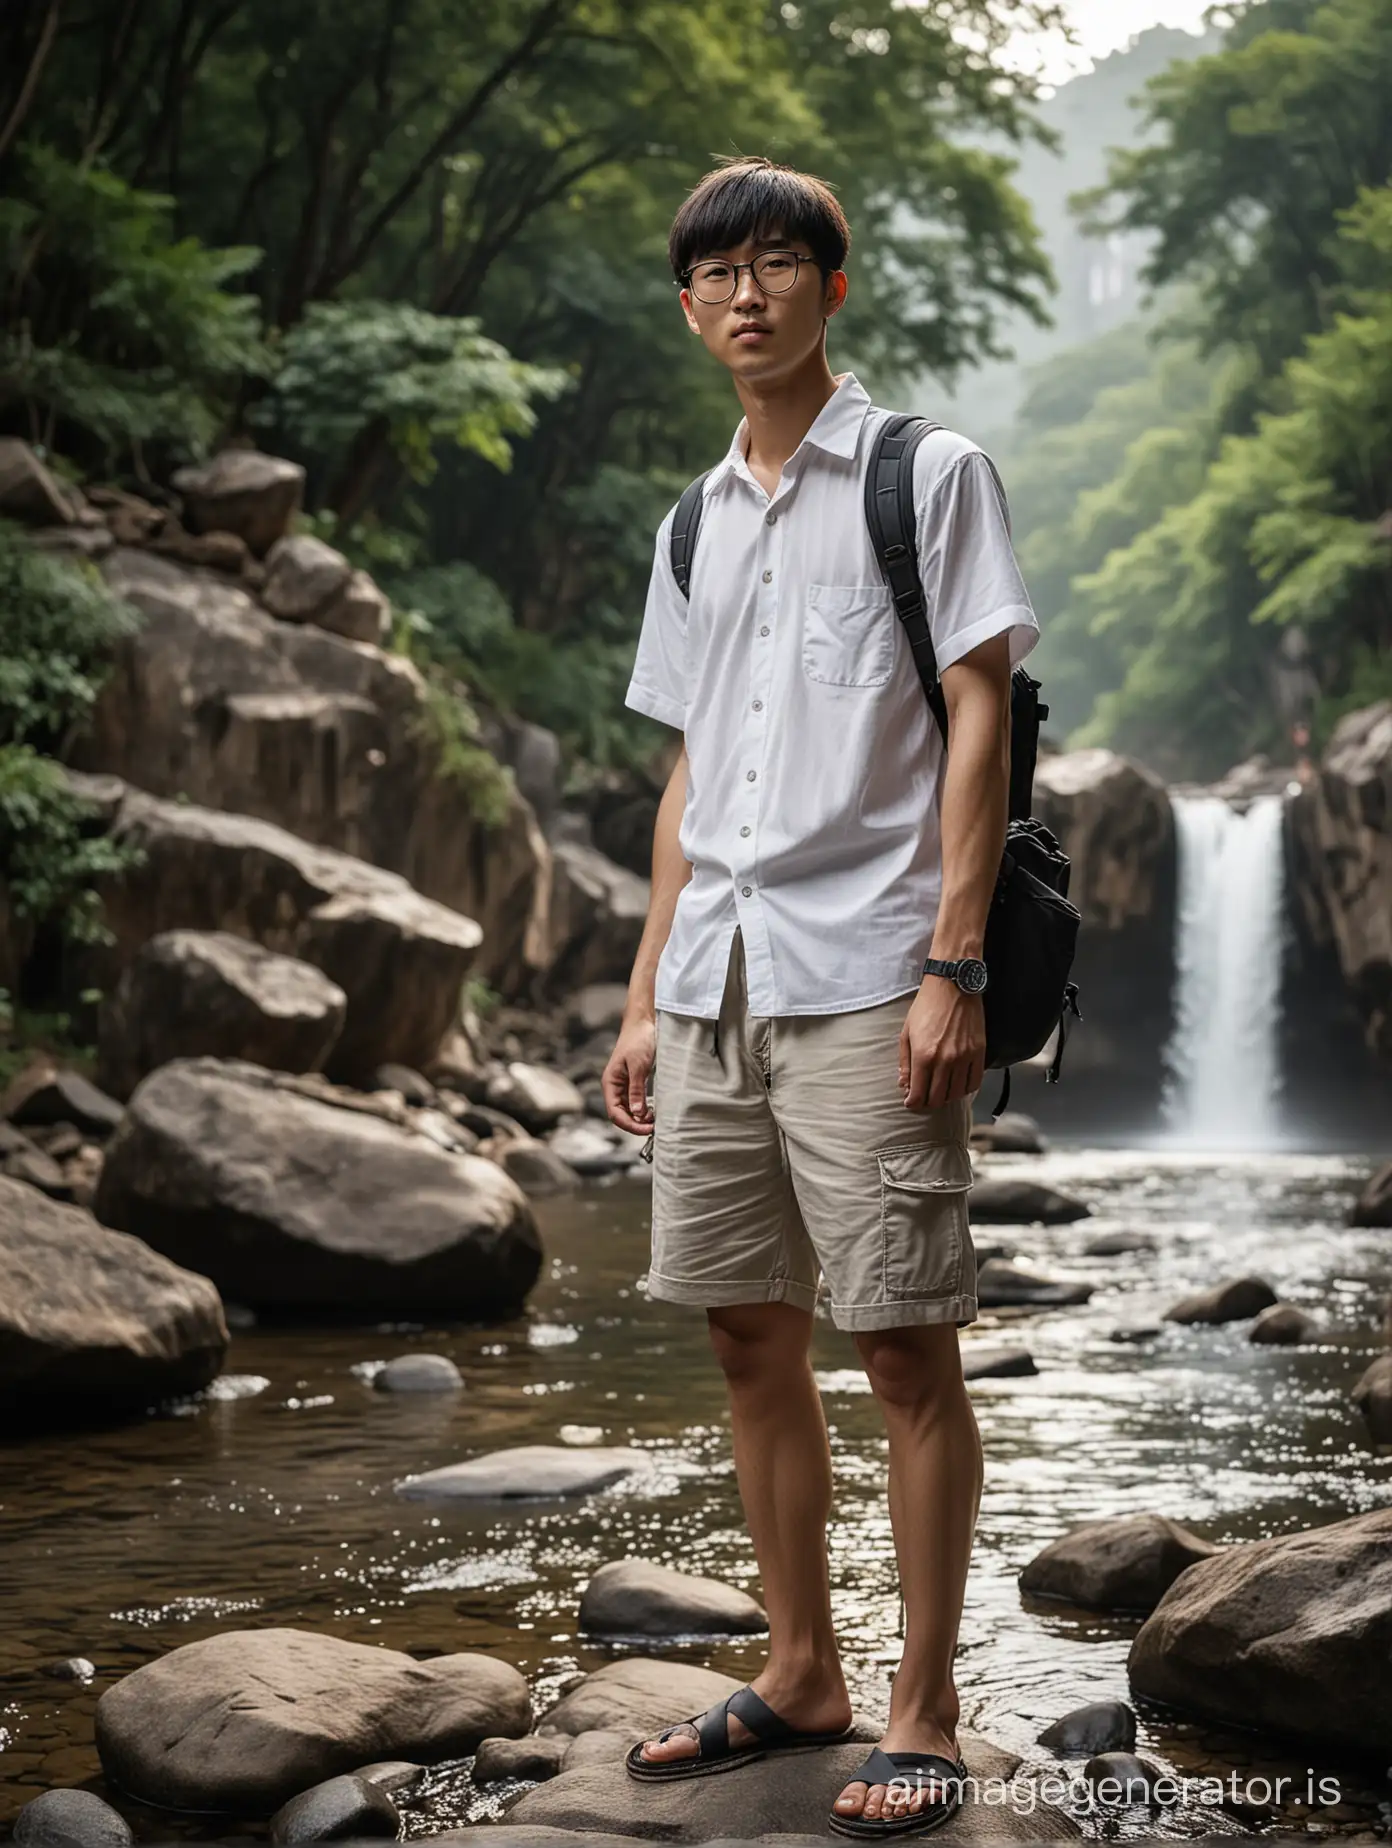 dynamic portrait, long shot, an Korean man with bowl cut hair wearing a plain White shirt and shorts, wearing black glasses, standing barefoot,carrying a Fuji XT30 camera and backpack, daydreaming on rocks with a small river flowing clear, bokeh background with a natural waterfall, refracted sunlight behind him at dusk, cinematic images, professional photography, dynamic lighting, faces looking at the camera